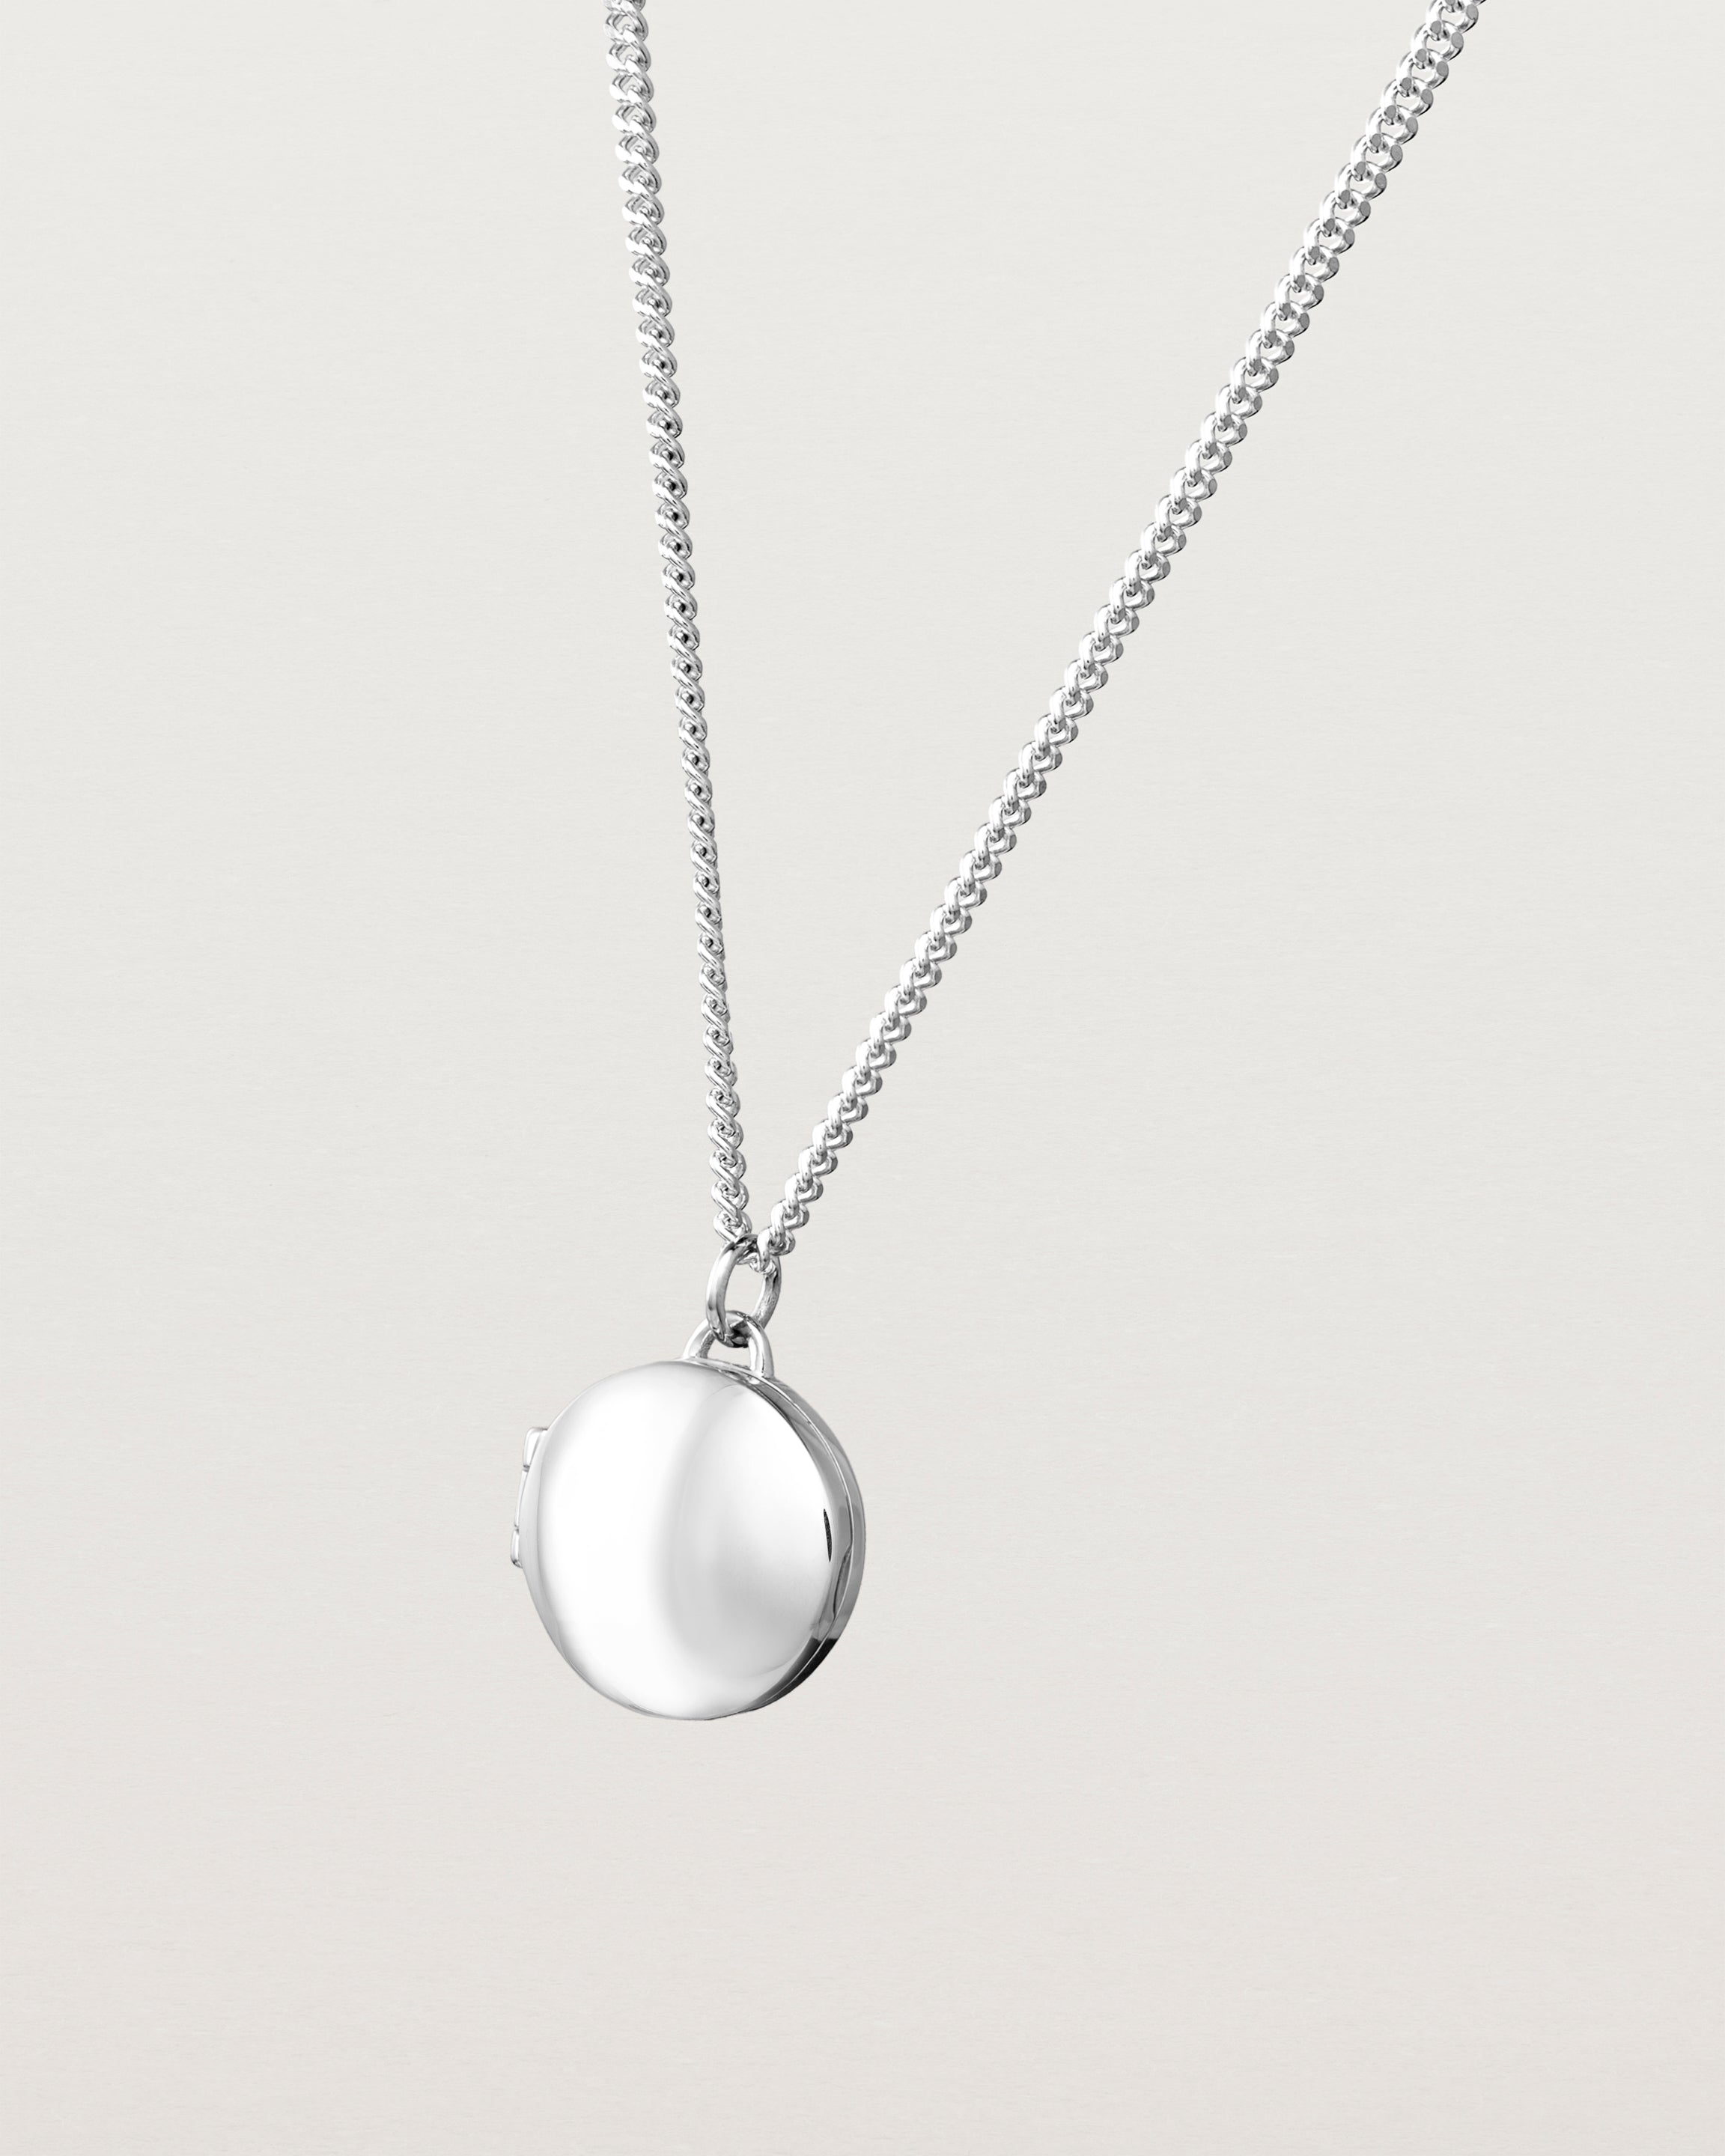 Angled view of the Signature Locket in sterling silver.